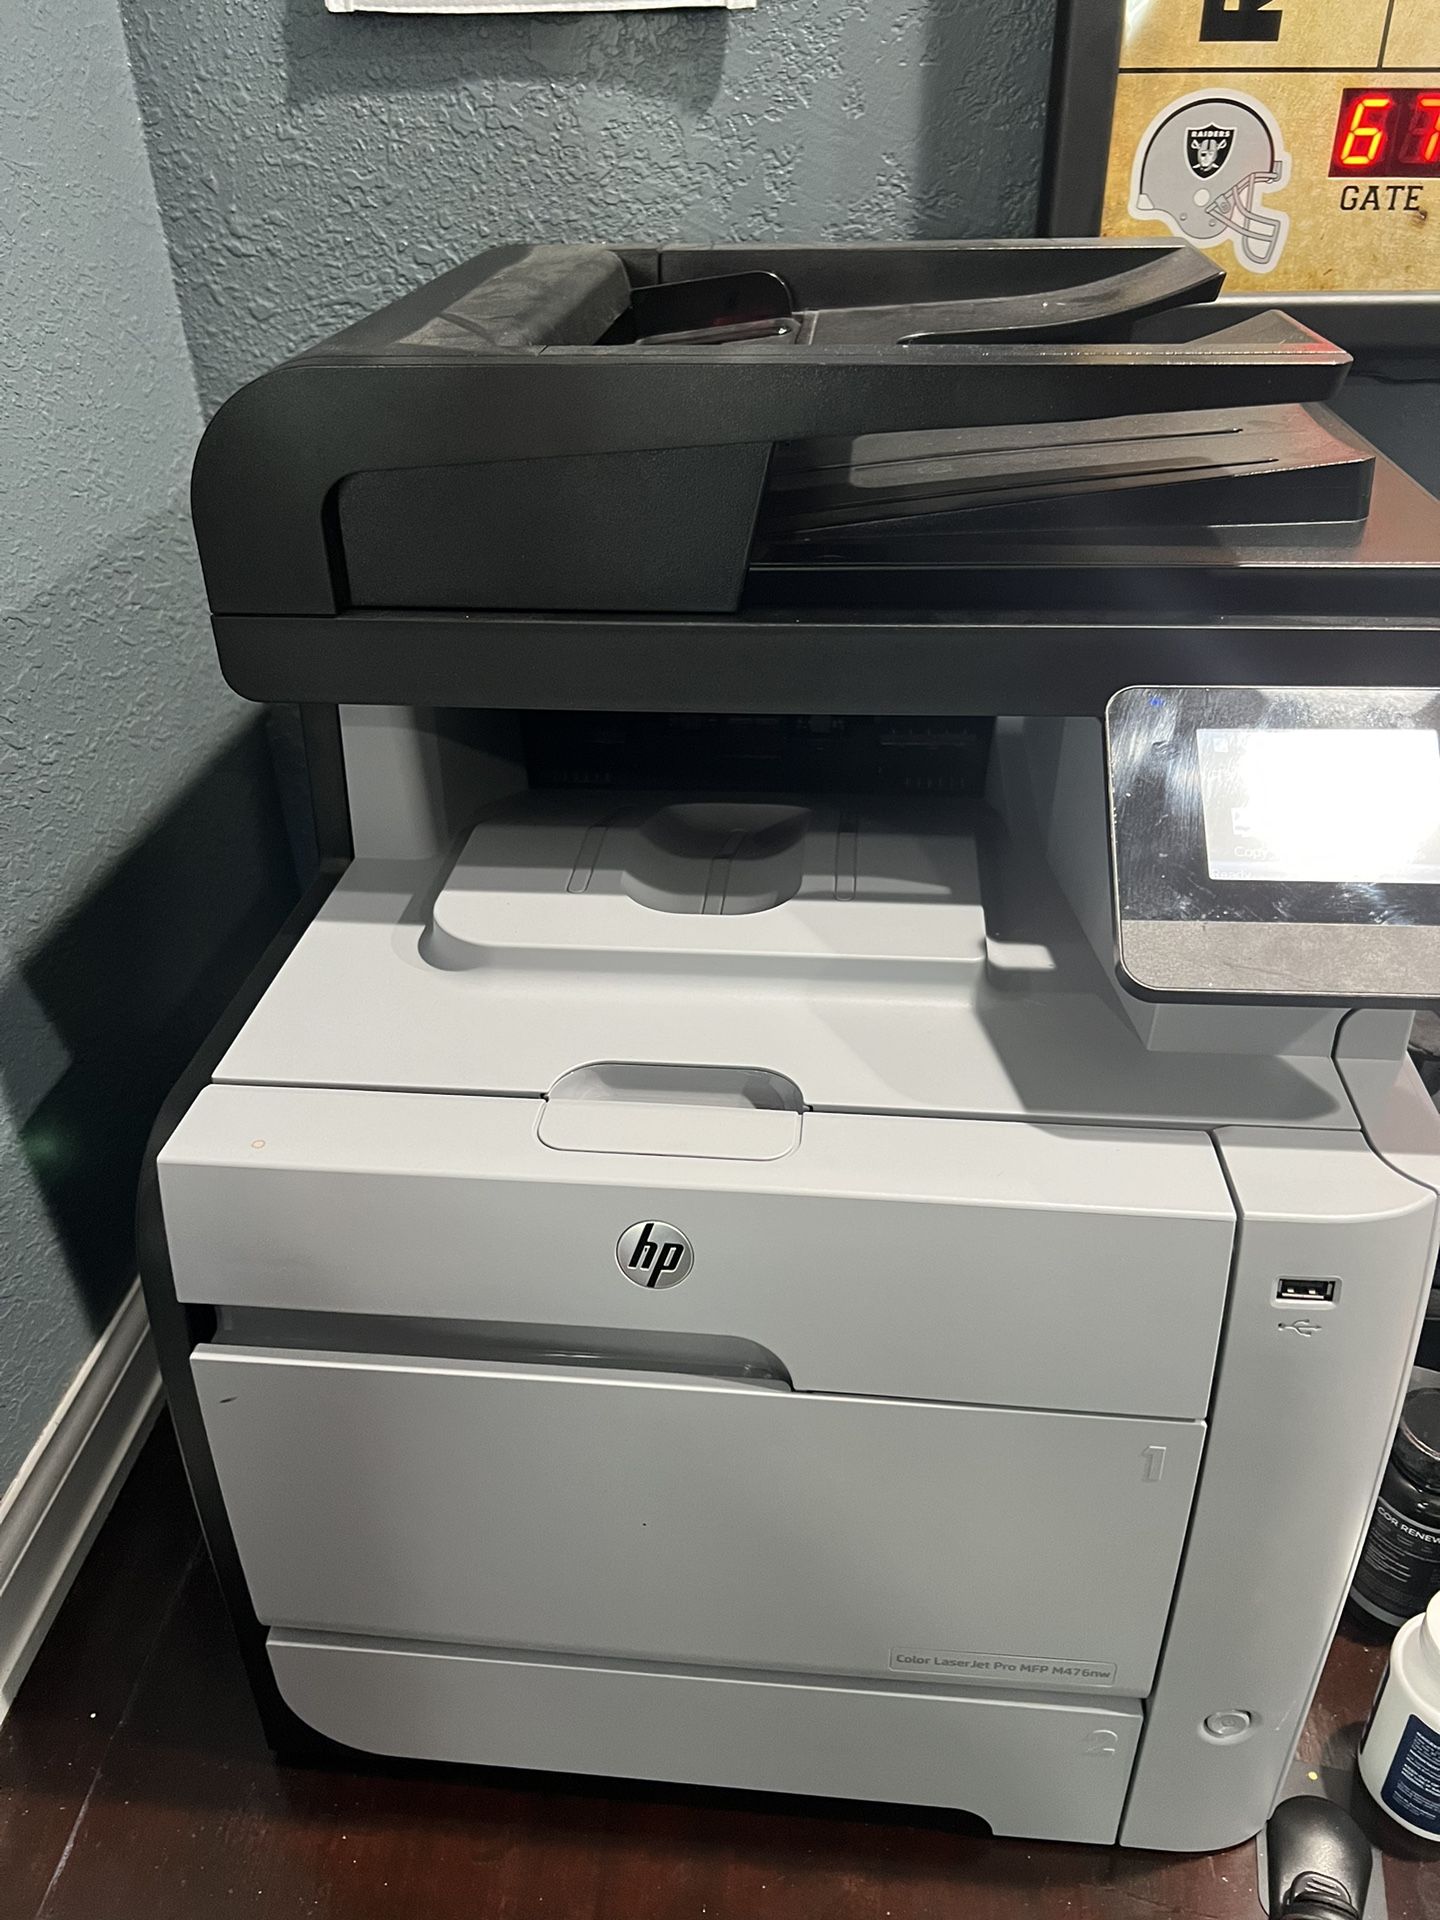 Two Printers For Sale. 175.00 OBO